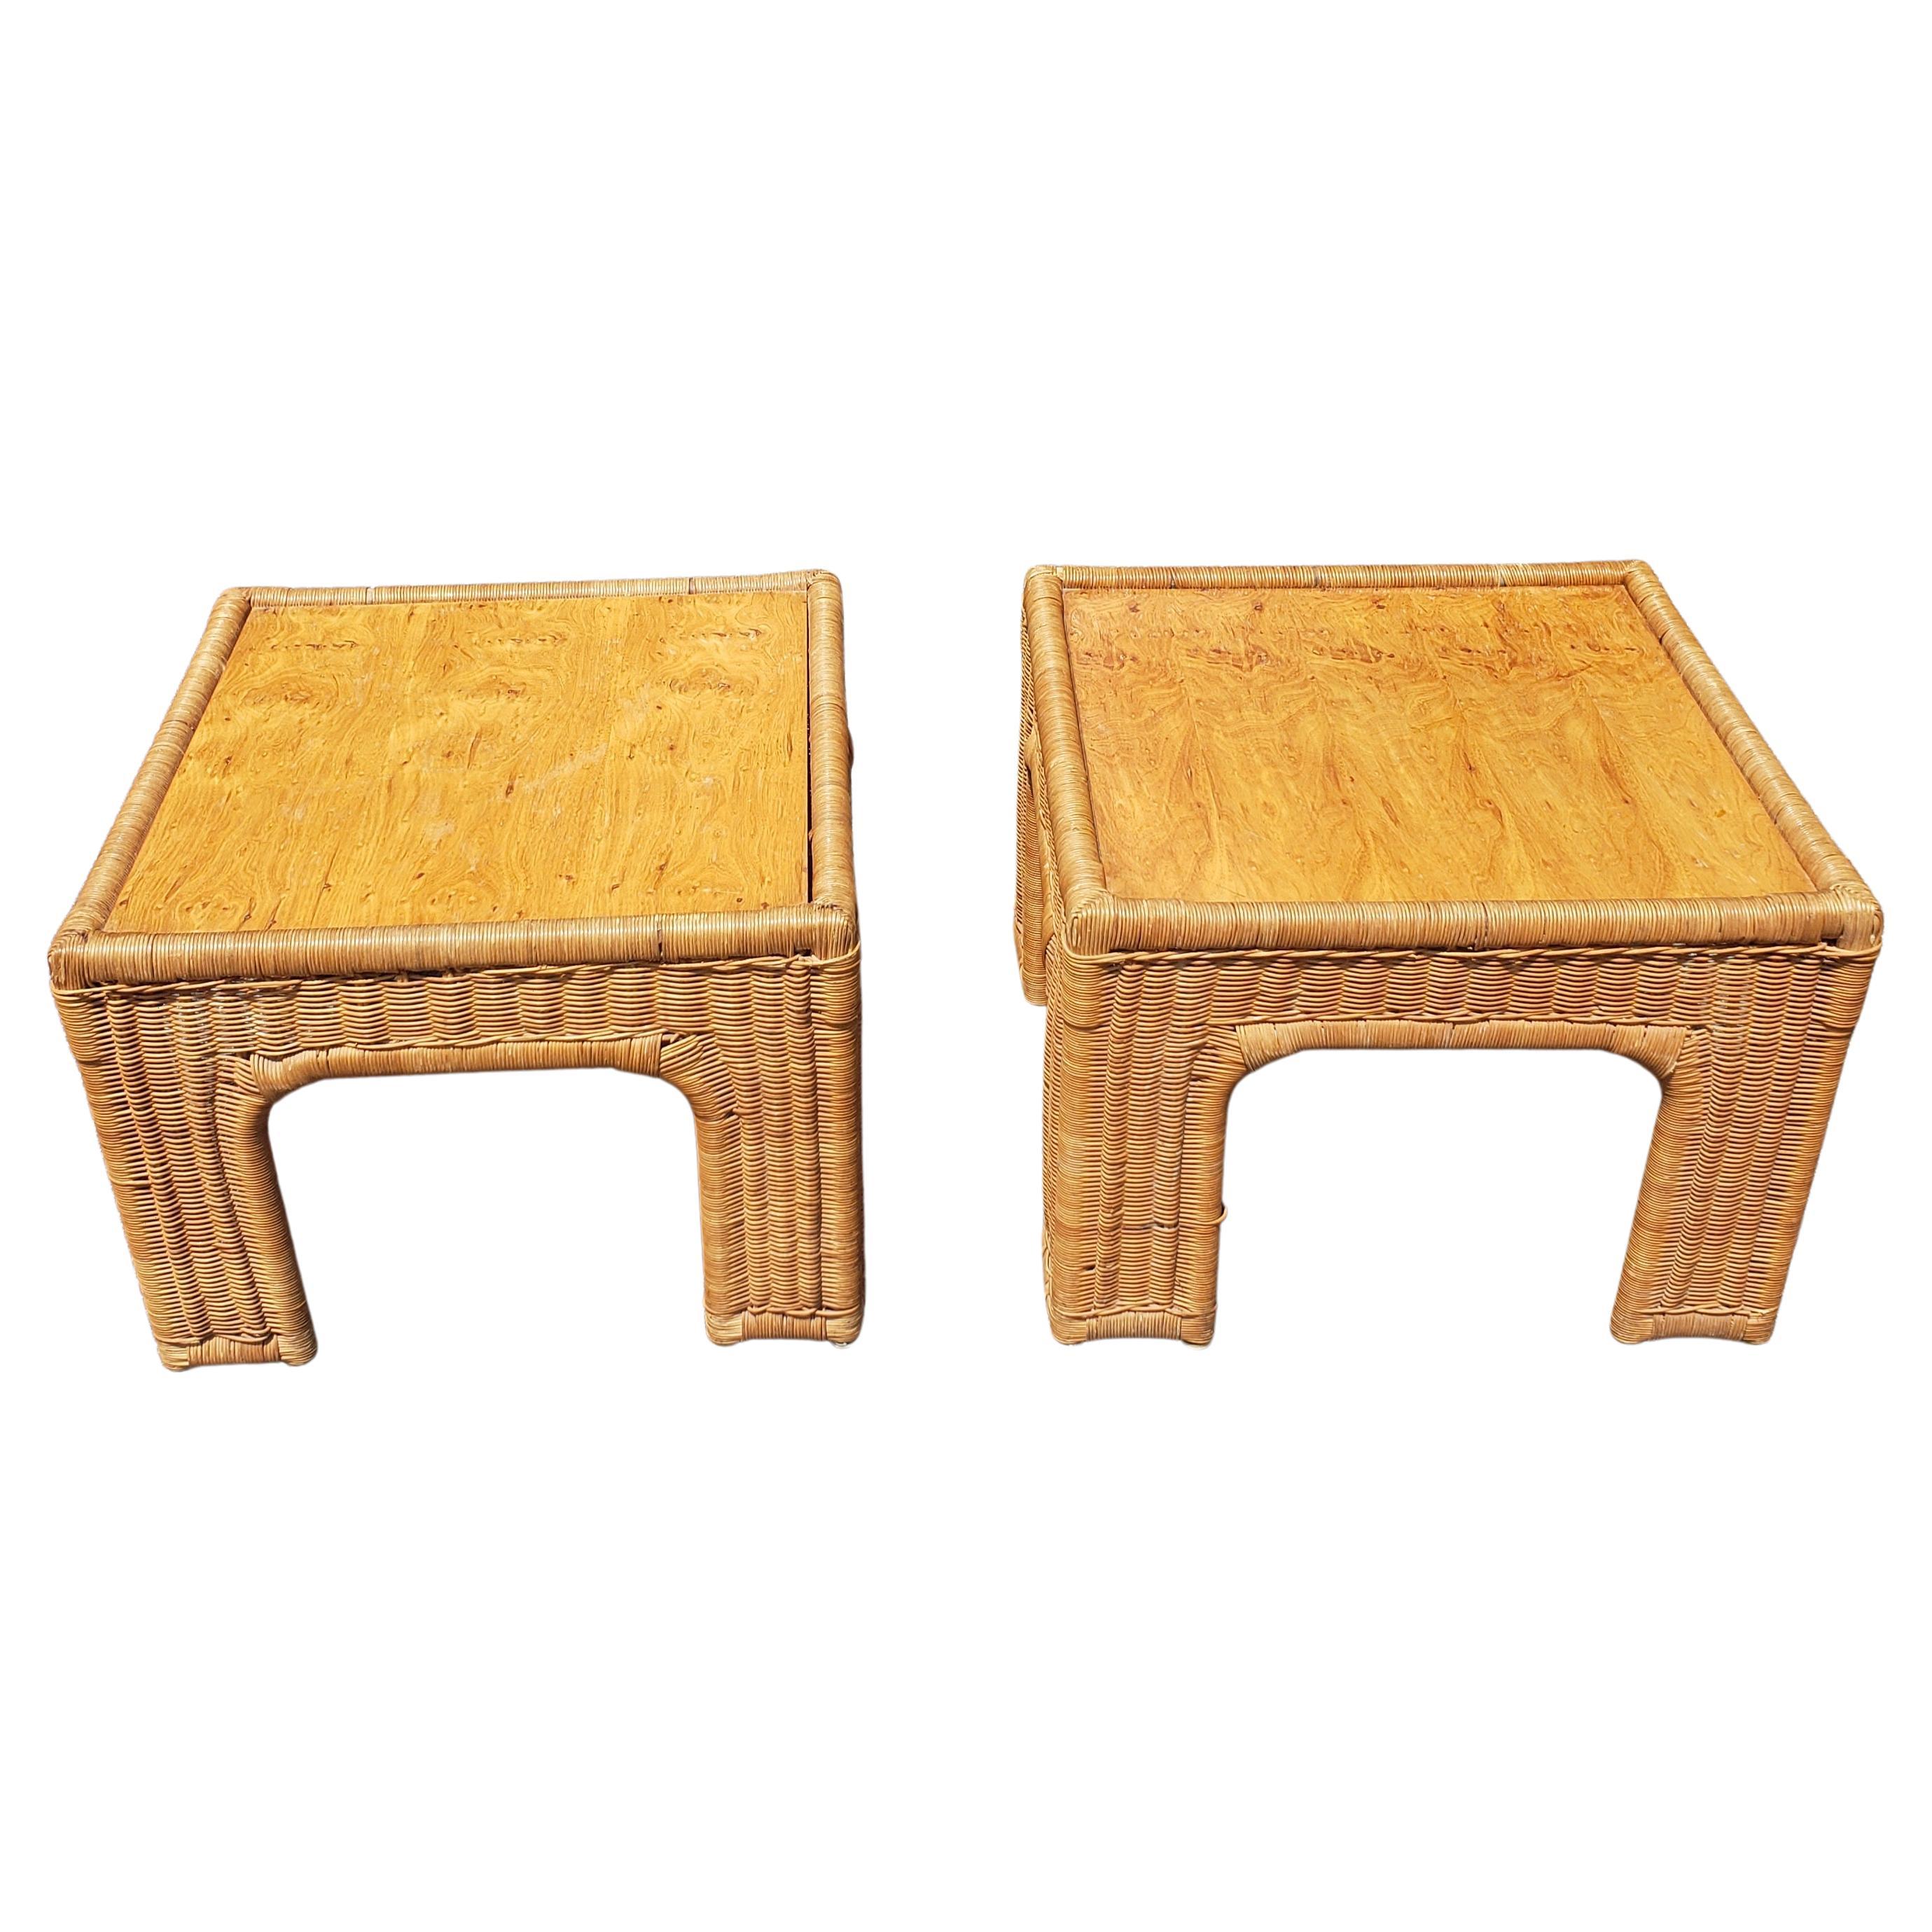 For your consideration is a pair of vintage woven wicker and wood top side tables by Thomasville. 
Measure 22